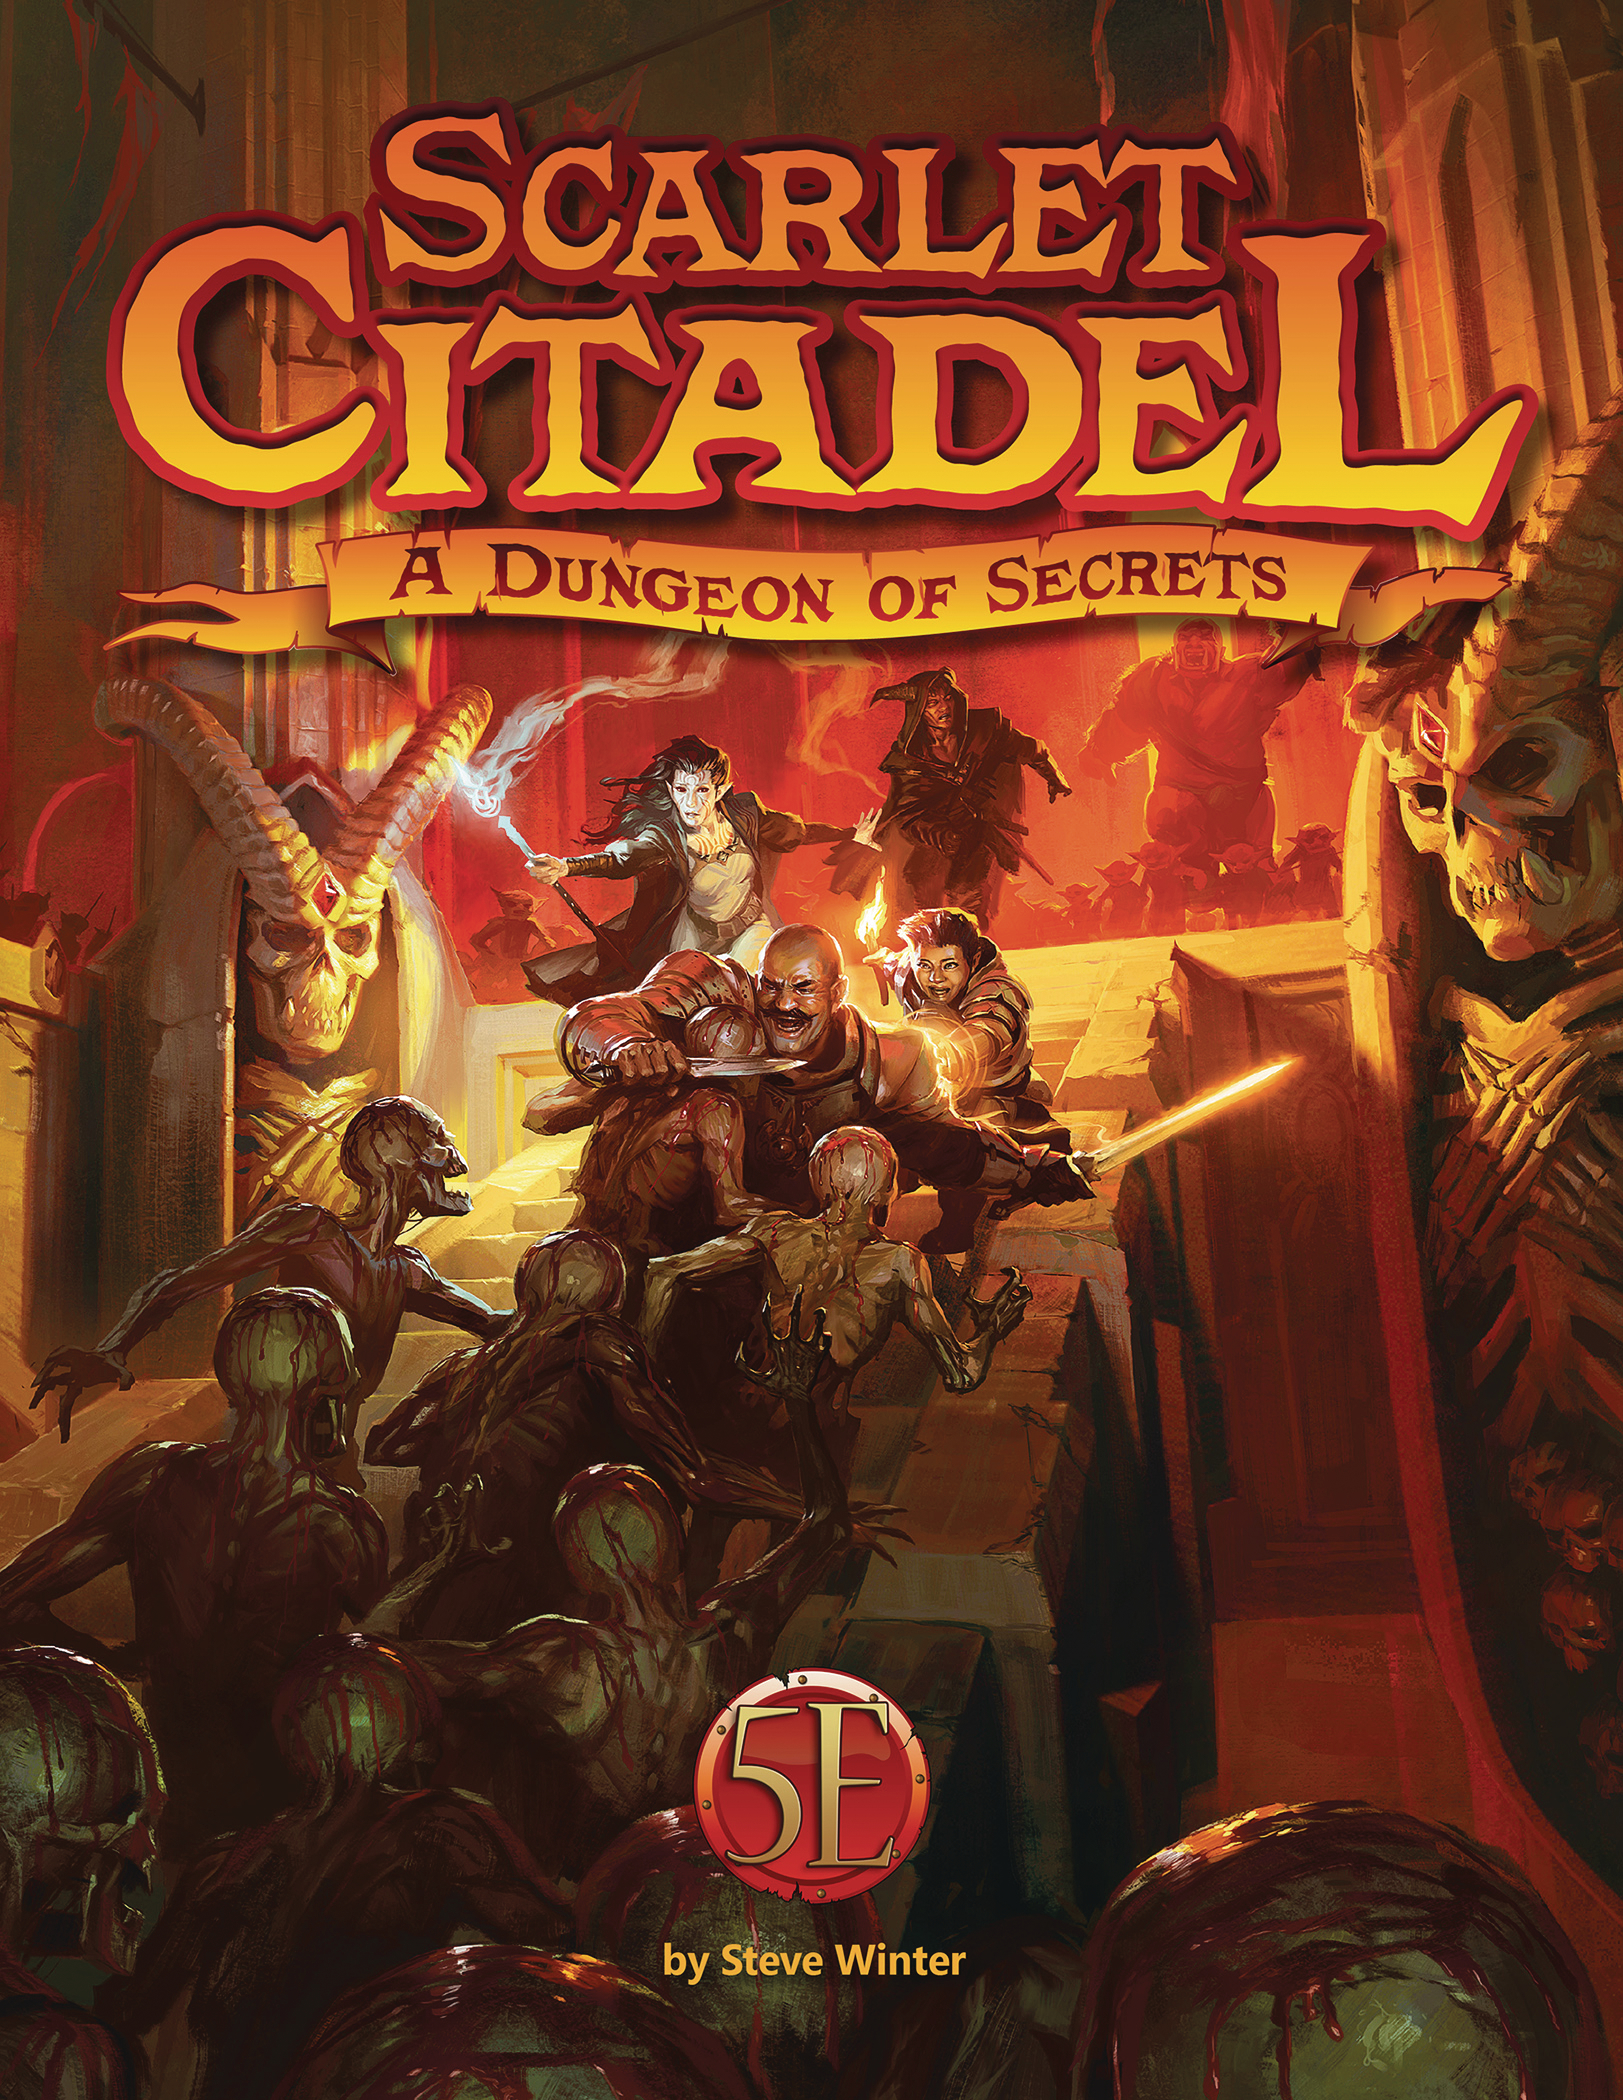 Scarlet Citadel Dungeons & Dragons 5th Edition Hardcover